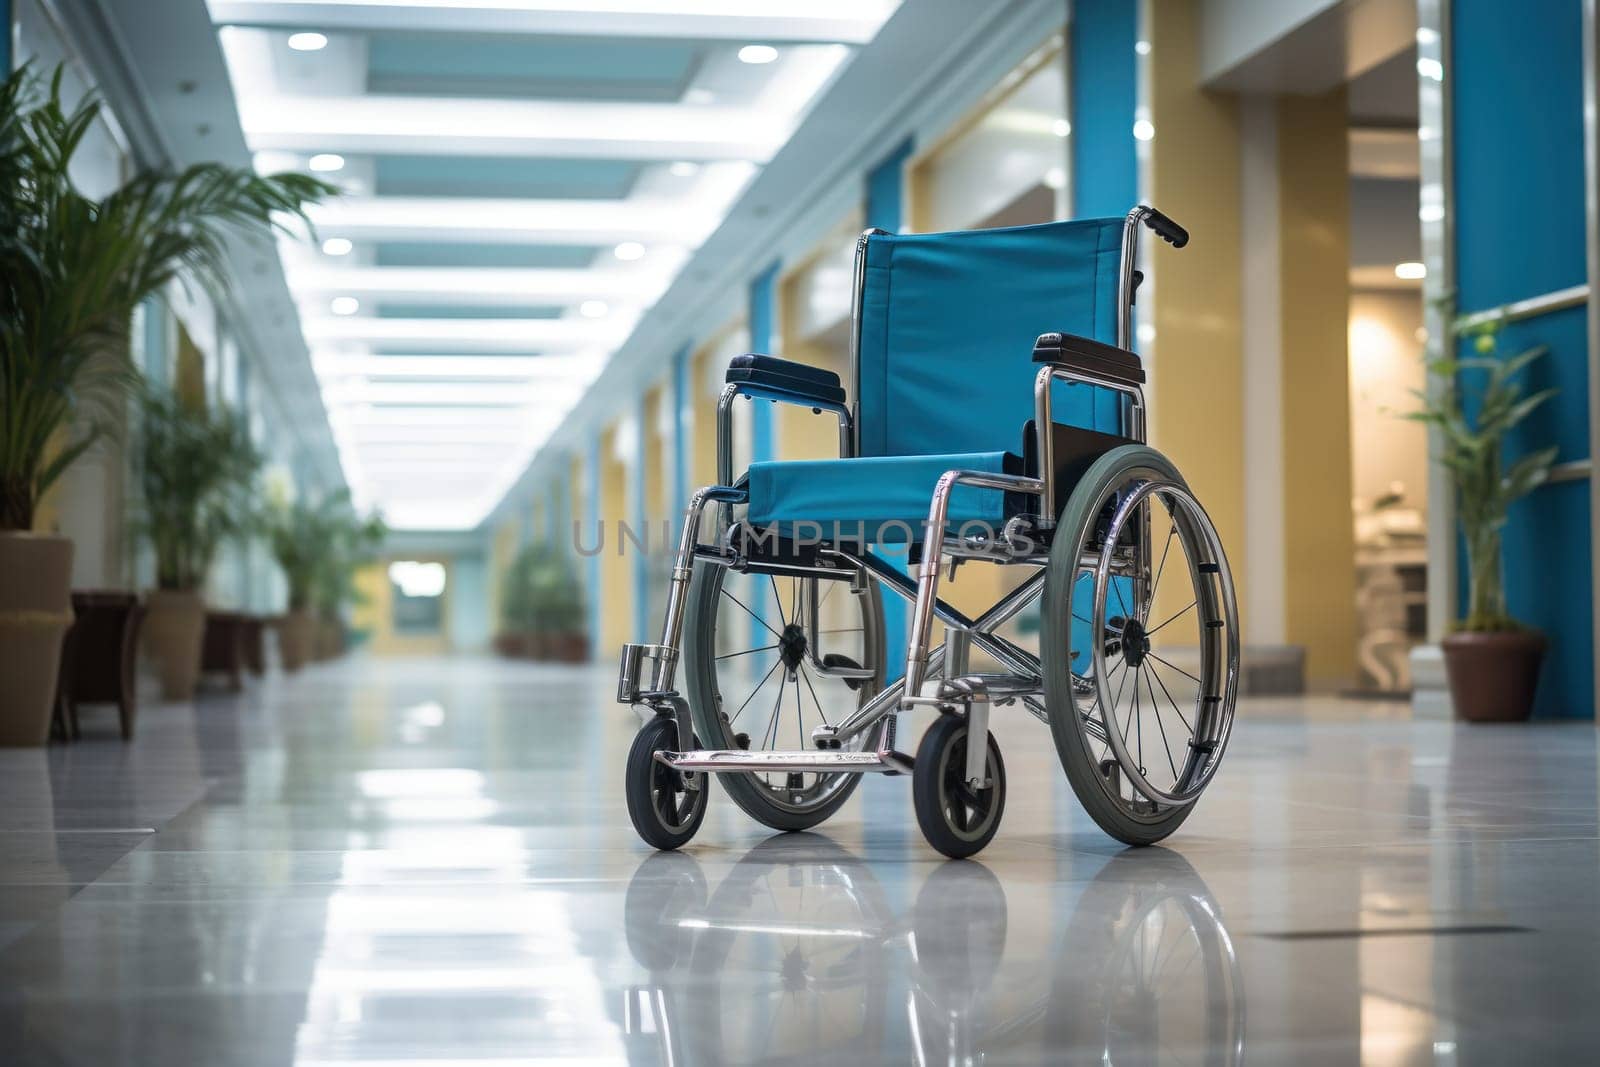 Wheelchair in the hospital with light copy space on left area.